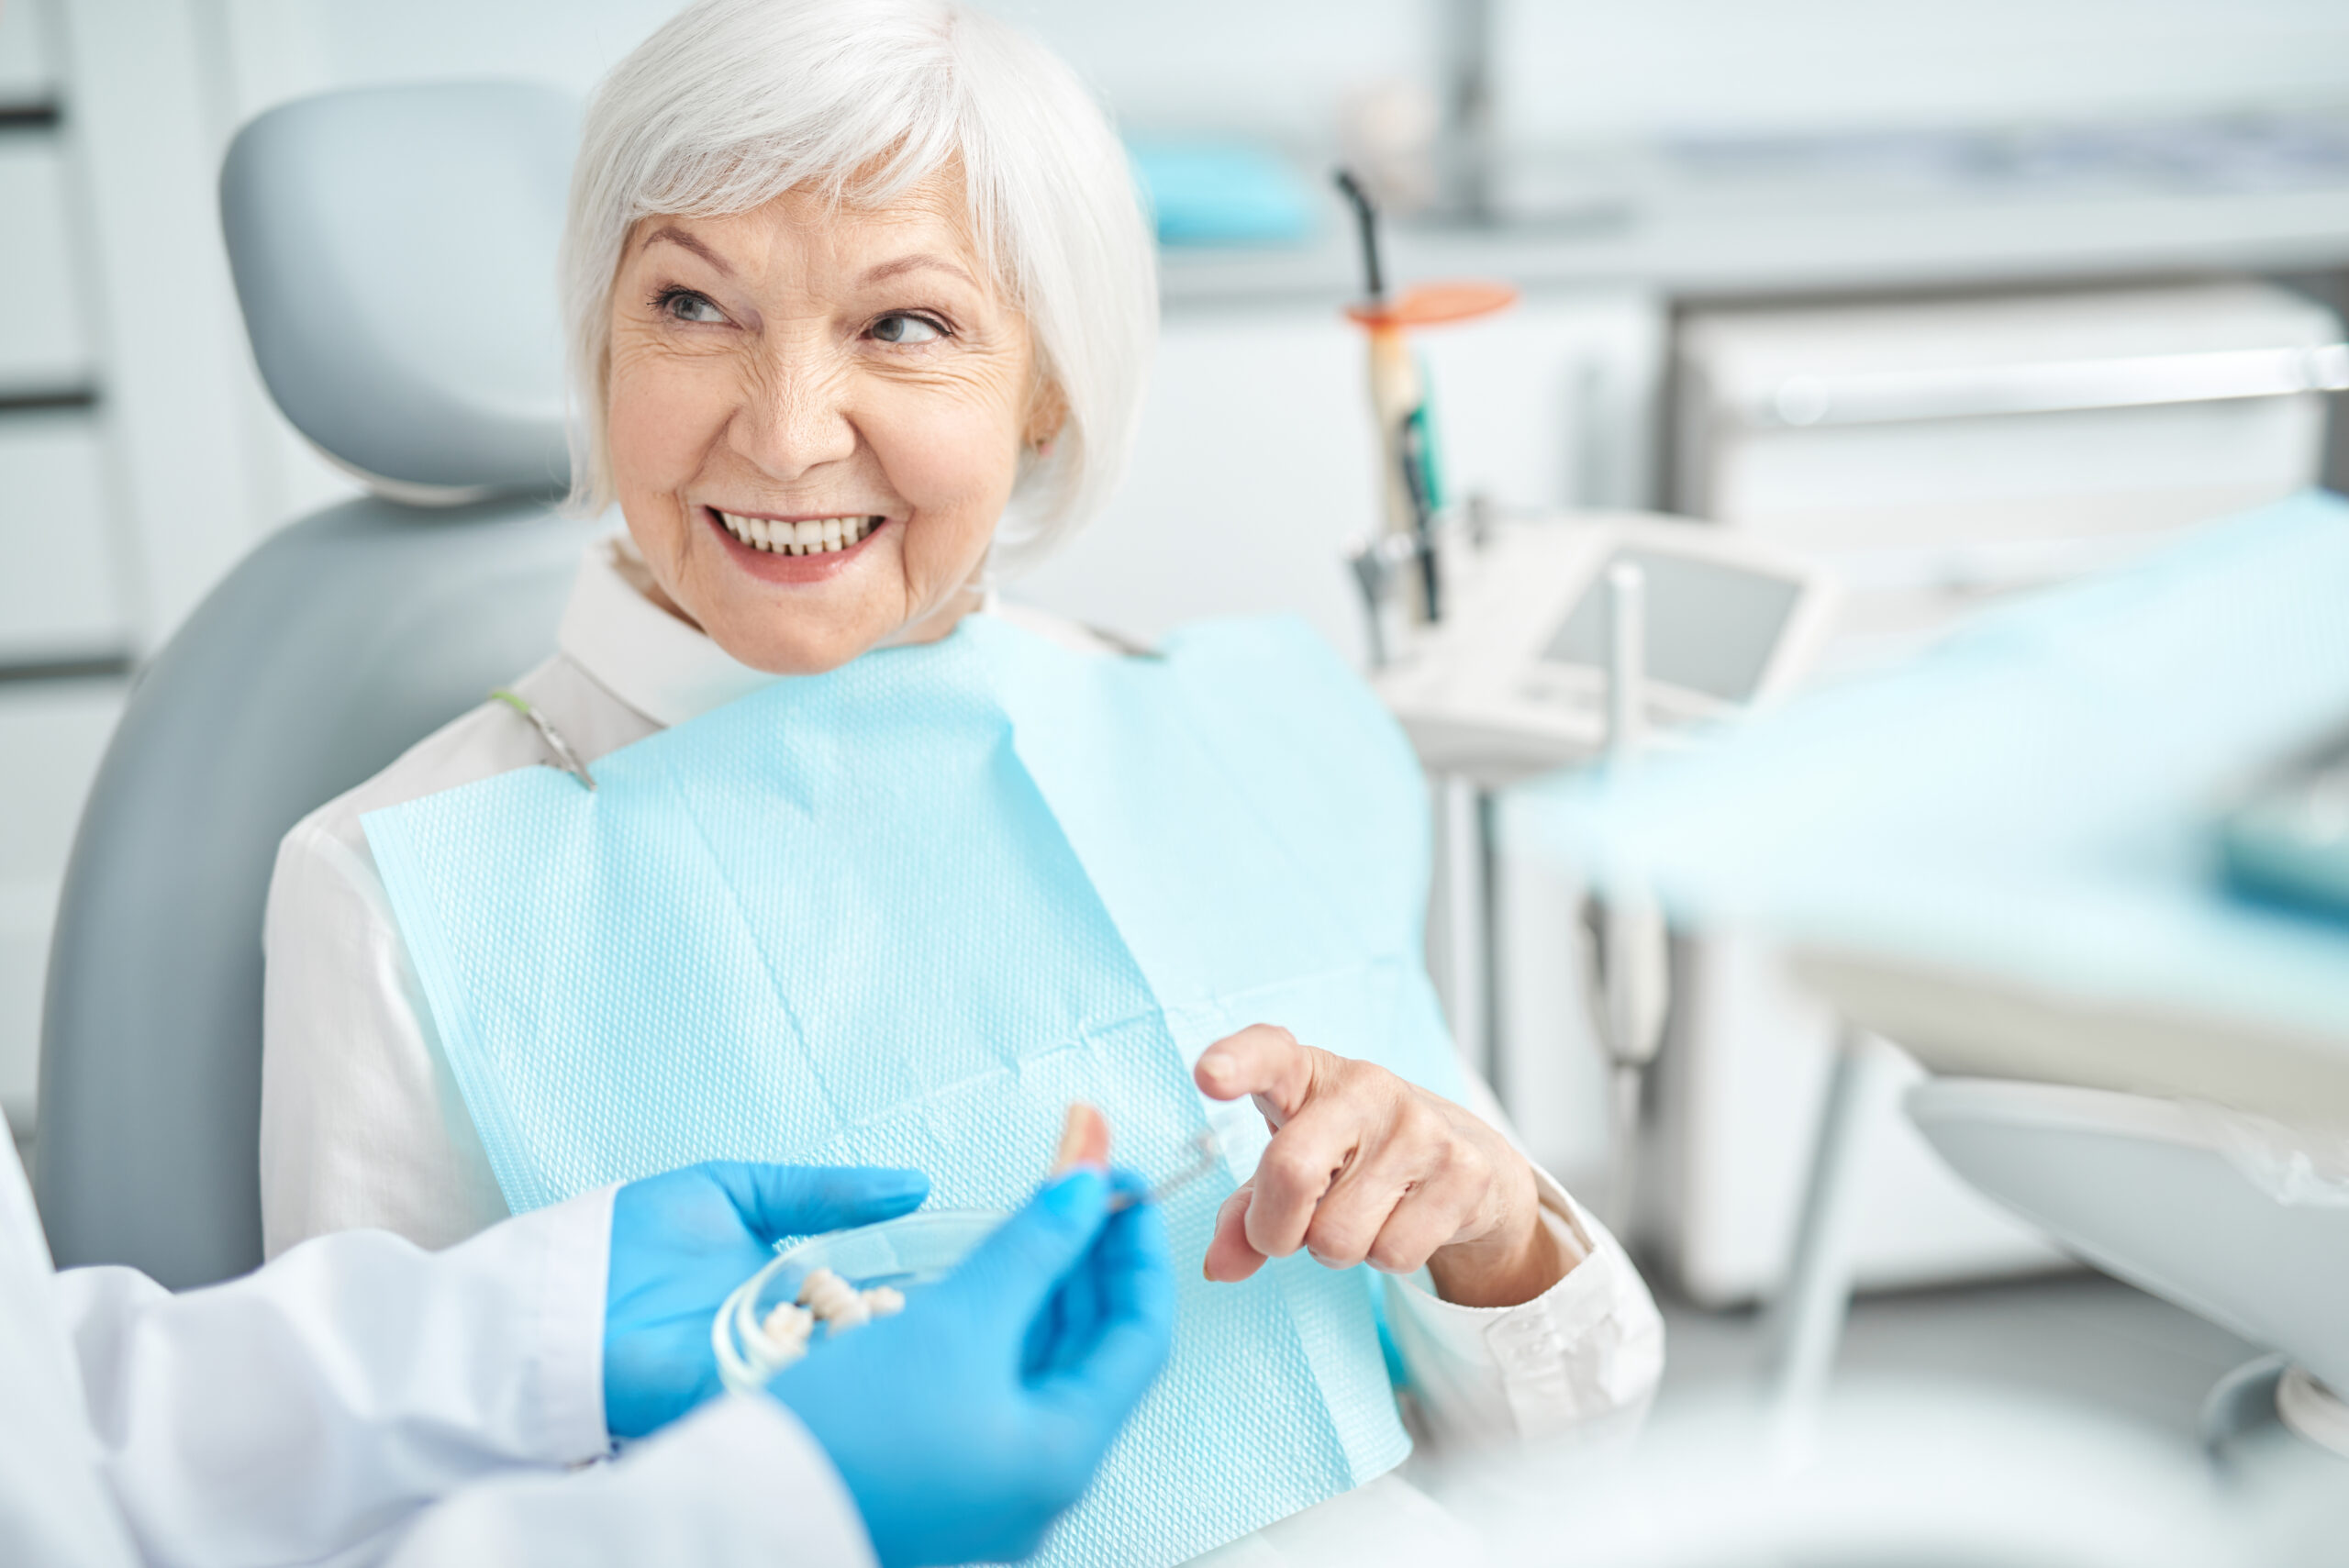 Smiling elderly woman looking at her doctor stock photo